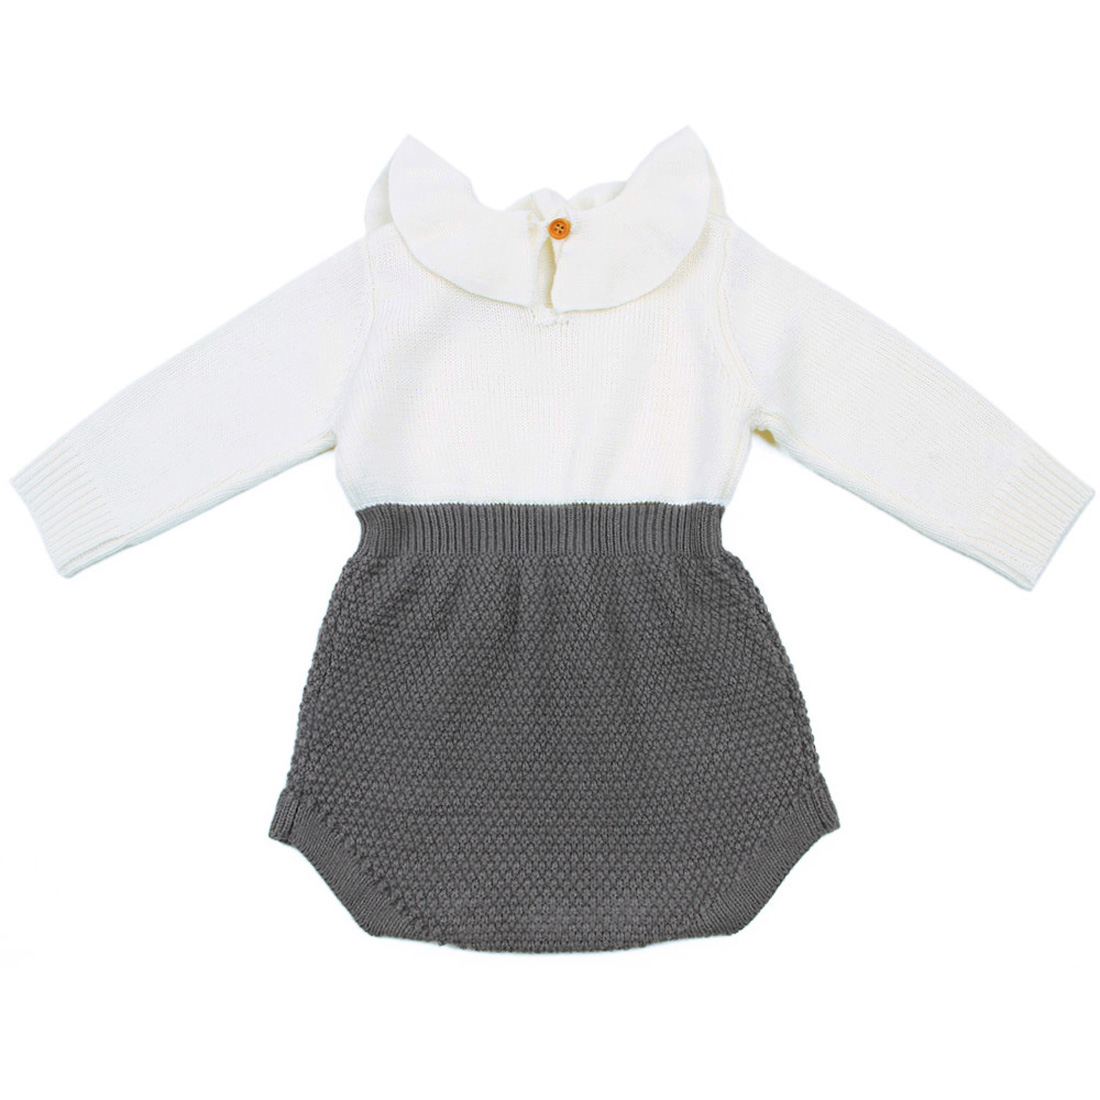 2019 Autumn Winter Newborn Baby Clothes Infant Toddler Girl Sweaters Rompers Wool Knitting Long Sleeve One-piece Outfits 0-24M